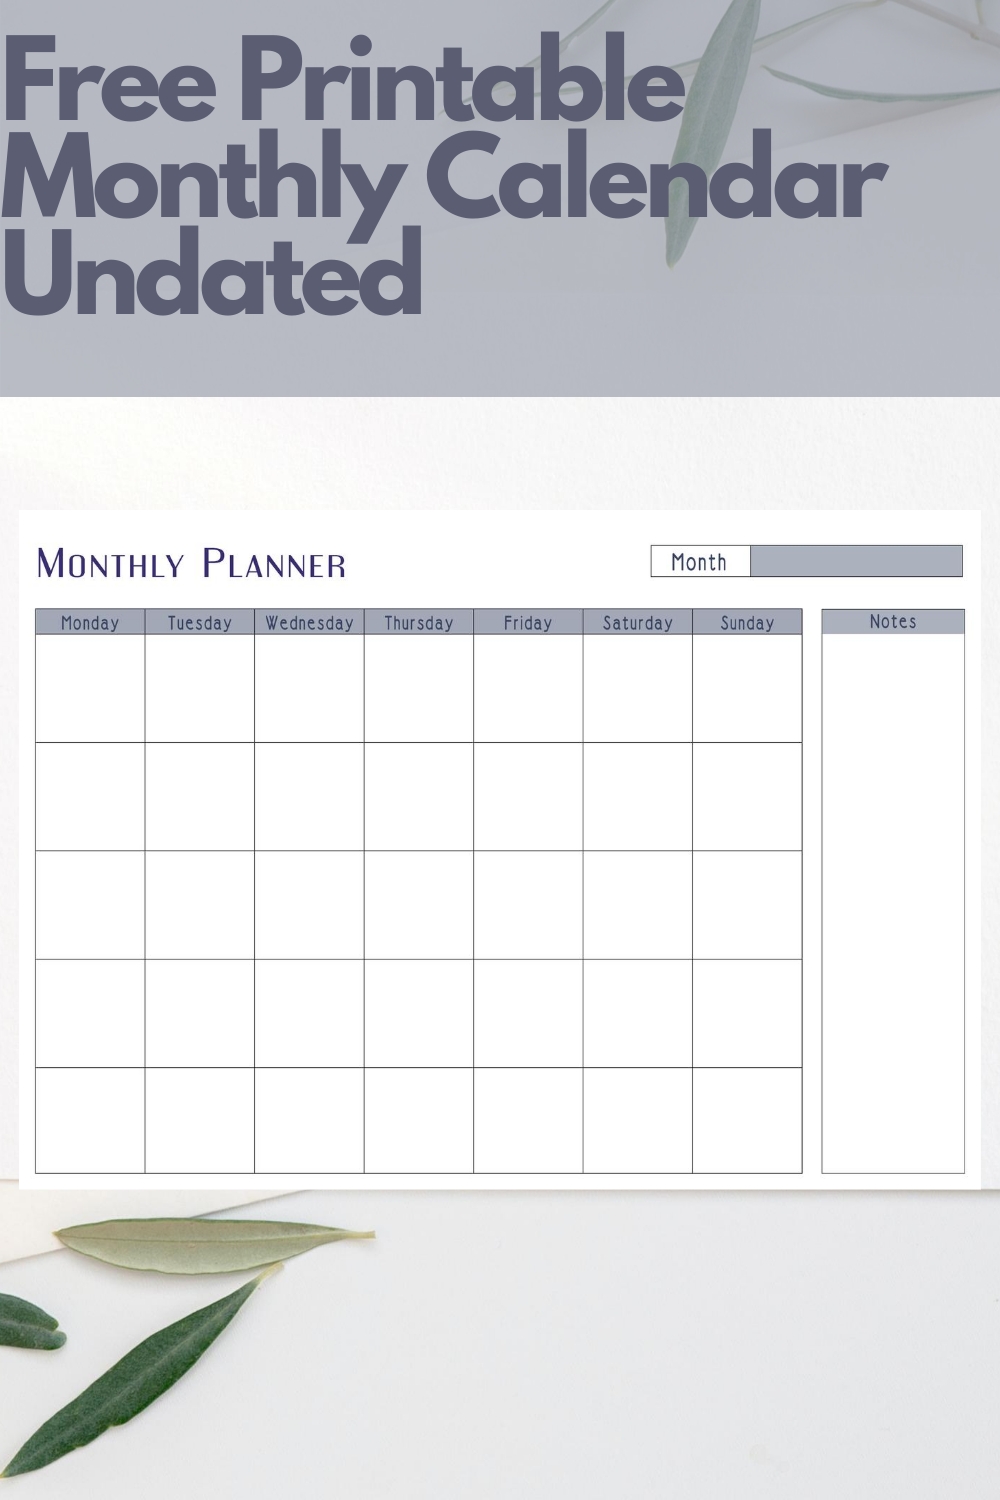 Free Monthly Undated Planner Printable | Undated Monthly